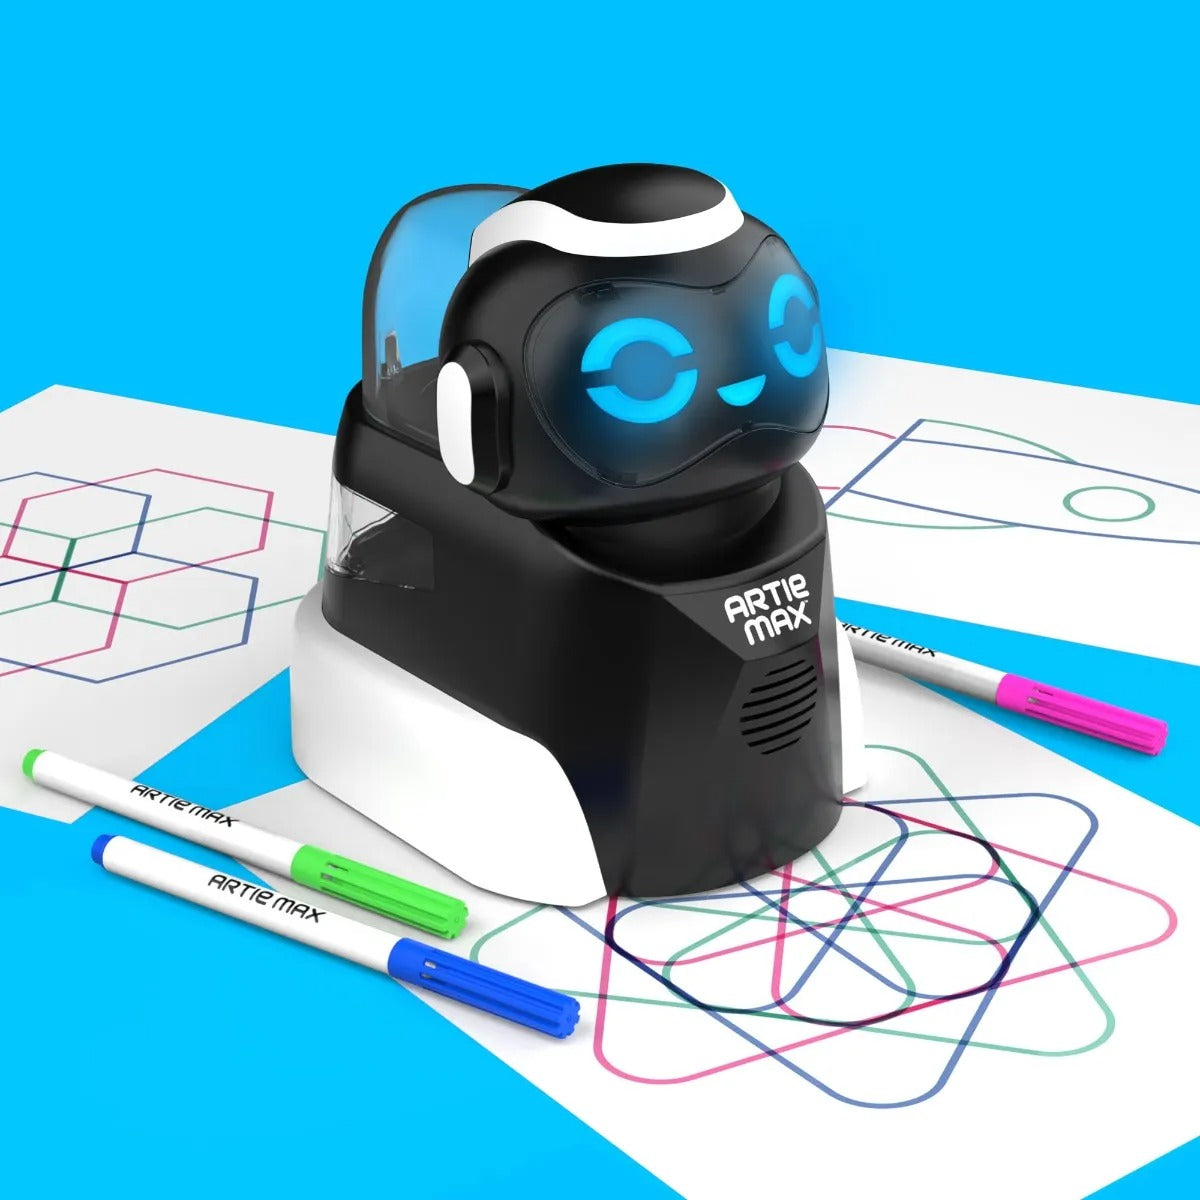 Artie Max, Take creative coding to the max with new Artie Max™ The Coding Robot! Artie Max brings coding and STEM learning to life by converting the code programmed in the simple user interface (UI) into real line drawings in up to 3 different colours. Kids learn to code in 5 coding languages - Blockly, Snap!, JavaScript, Python, and C++ - through fun, creative activities. Artie Max’s colour-changing LED light-up eyes add extra cool fun to coding for kids. Coding for kids is engaging and fun with new Artie 